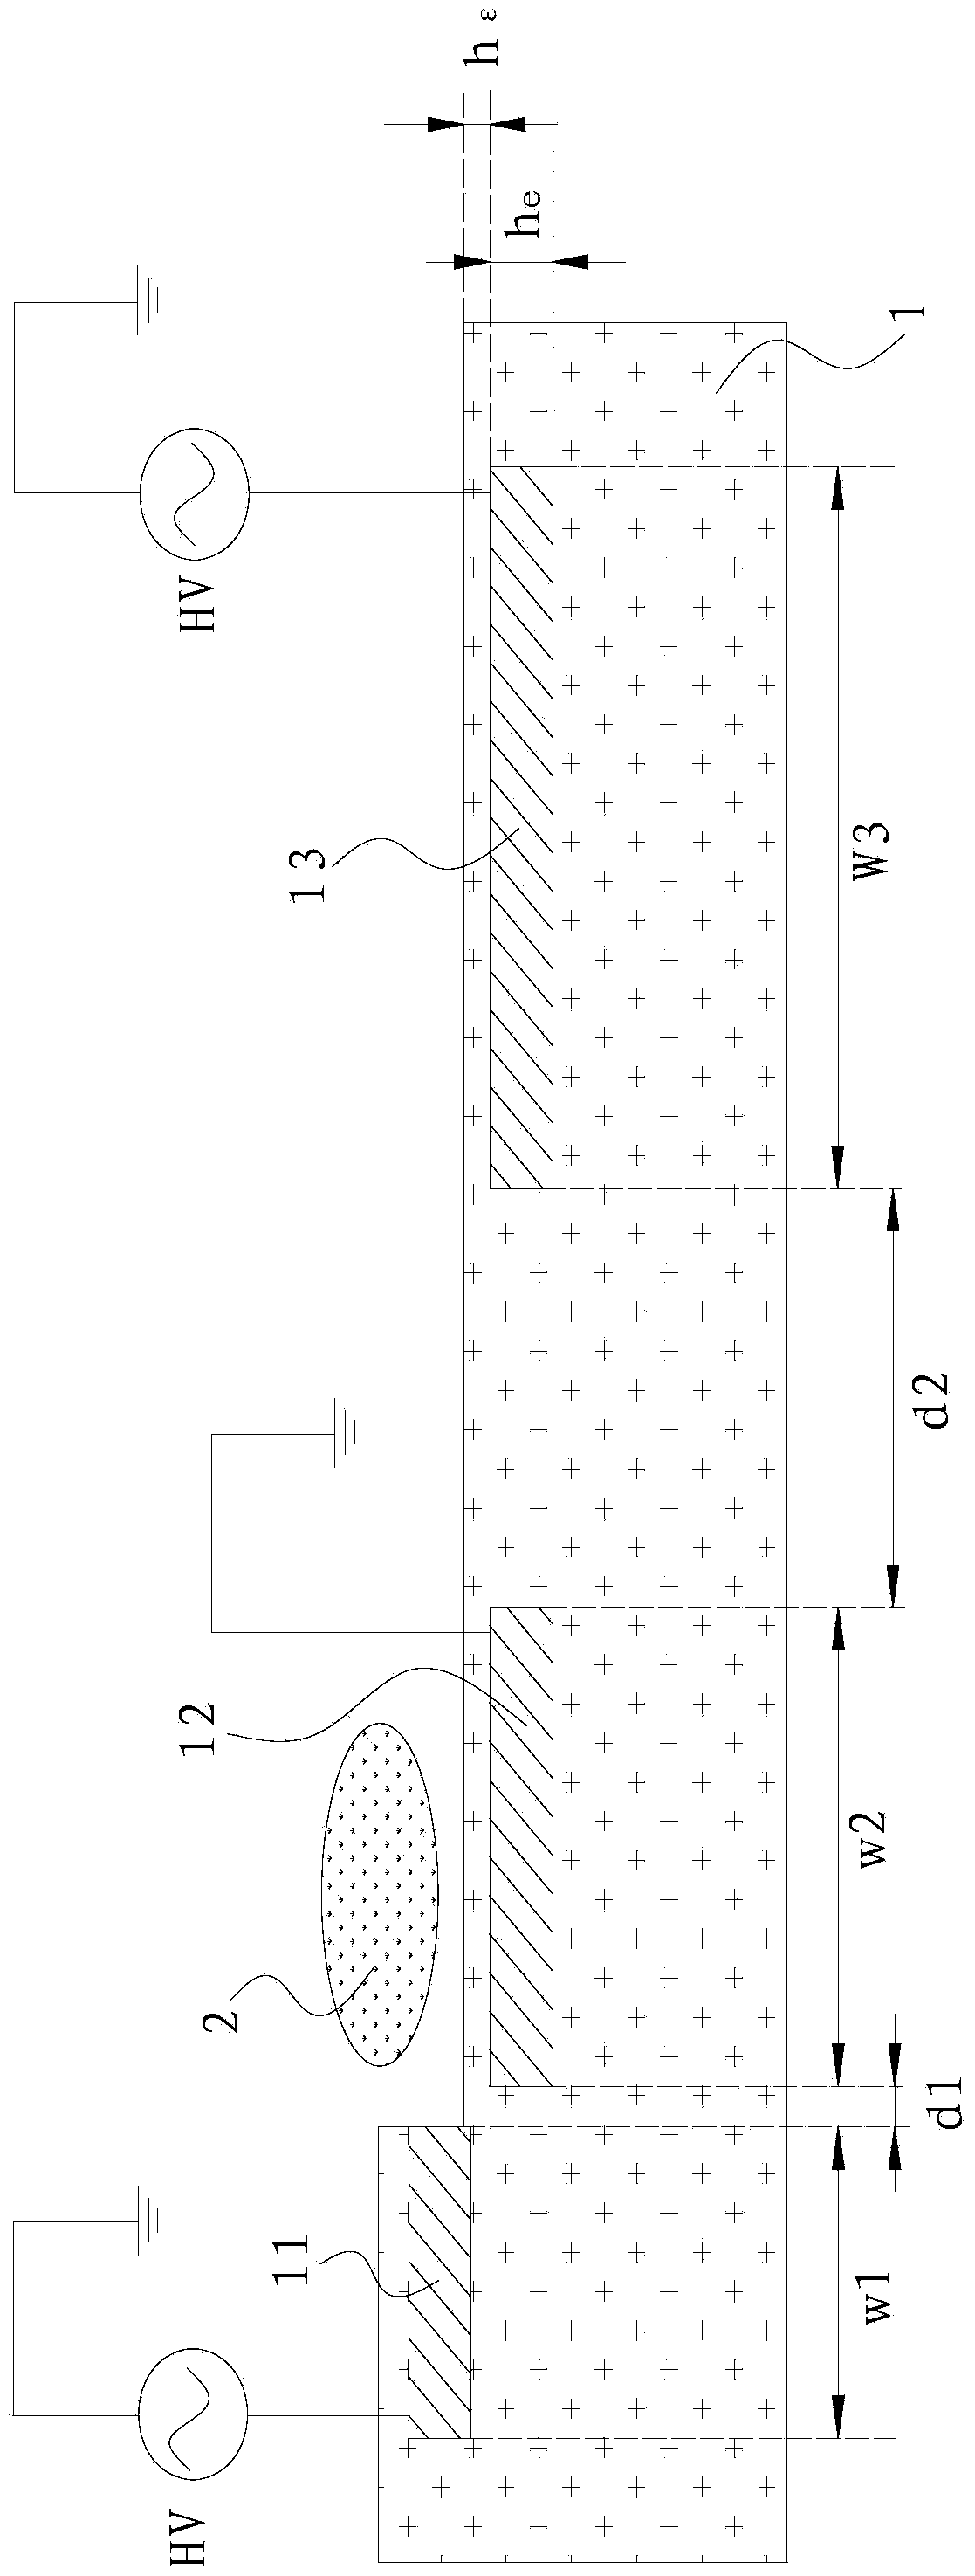 Dielectric barrier discharge plasma exciter and system